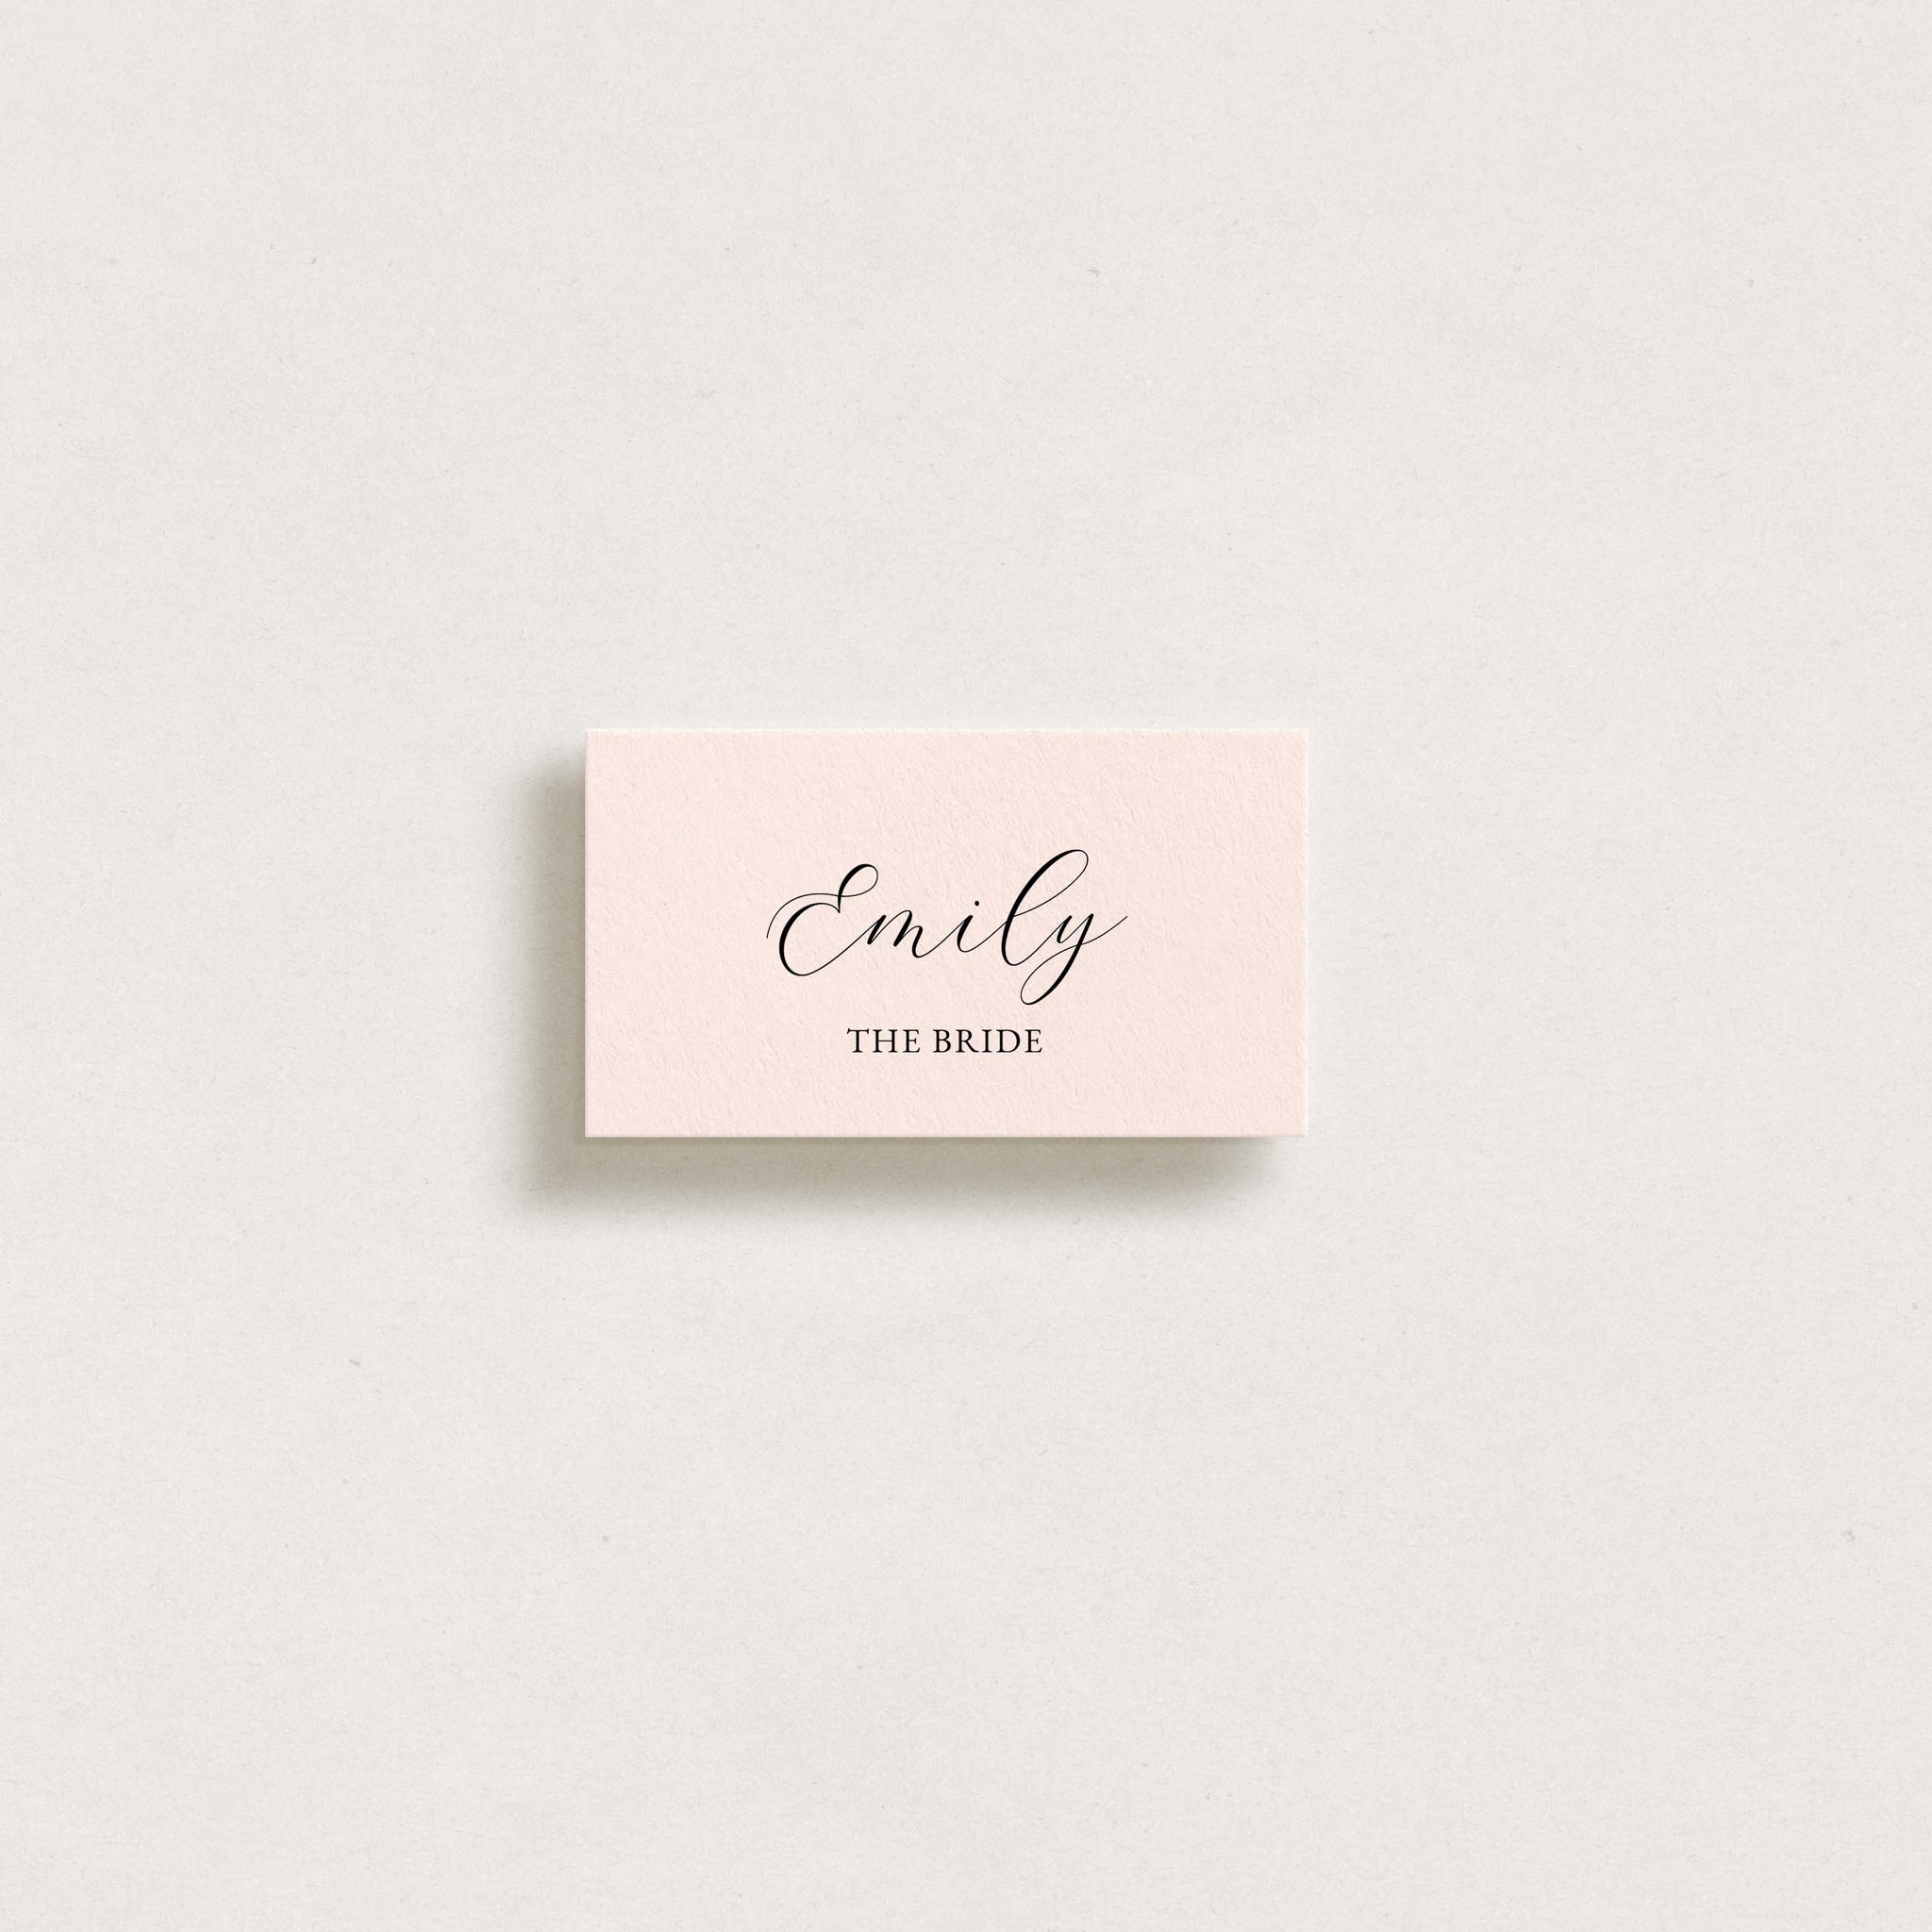 Serenity Placecard